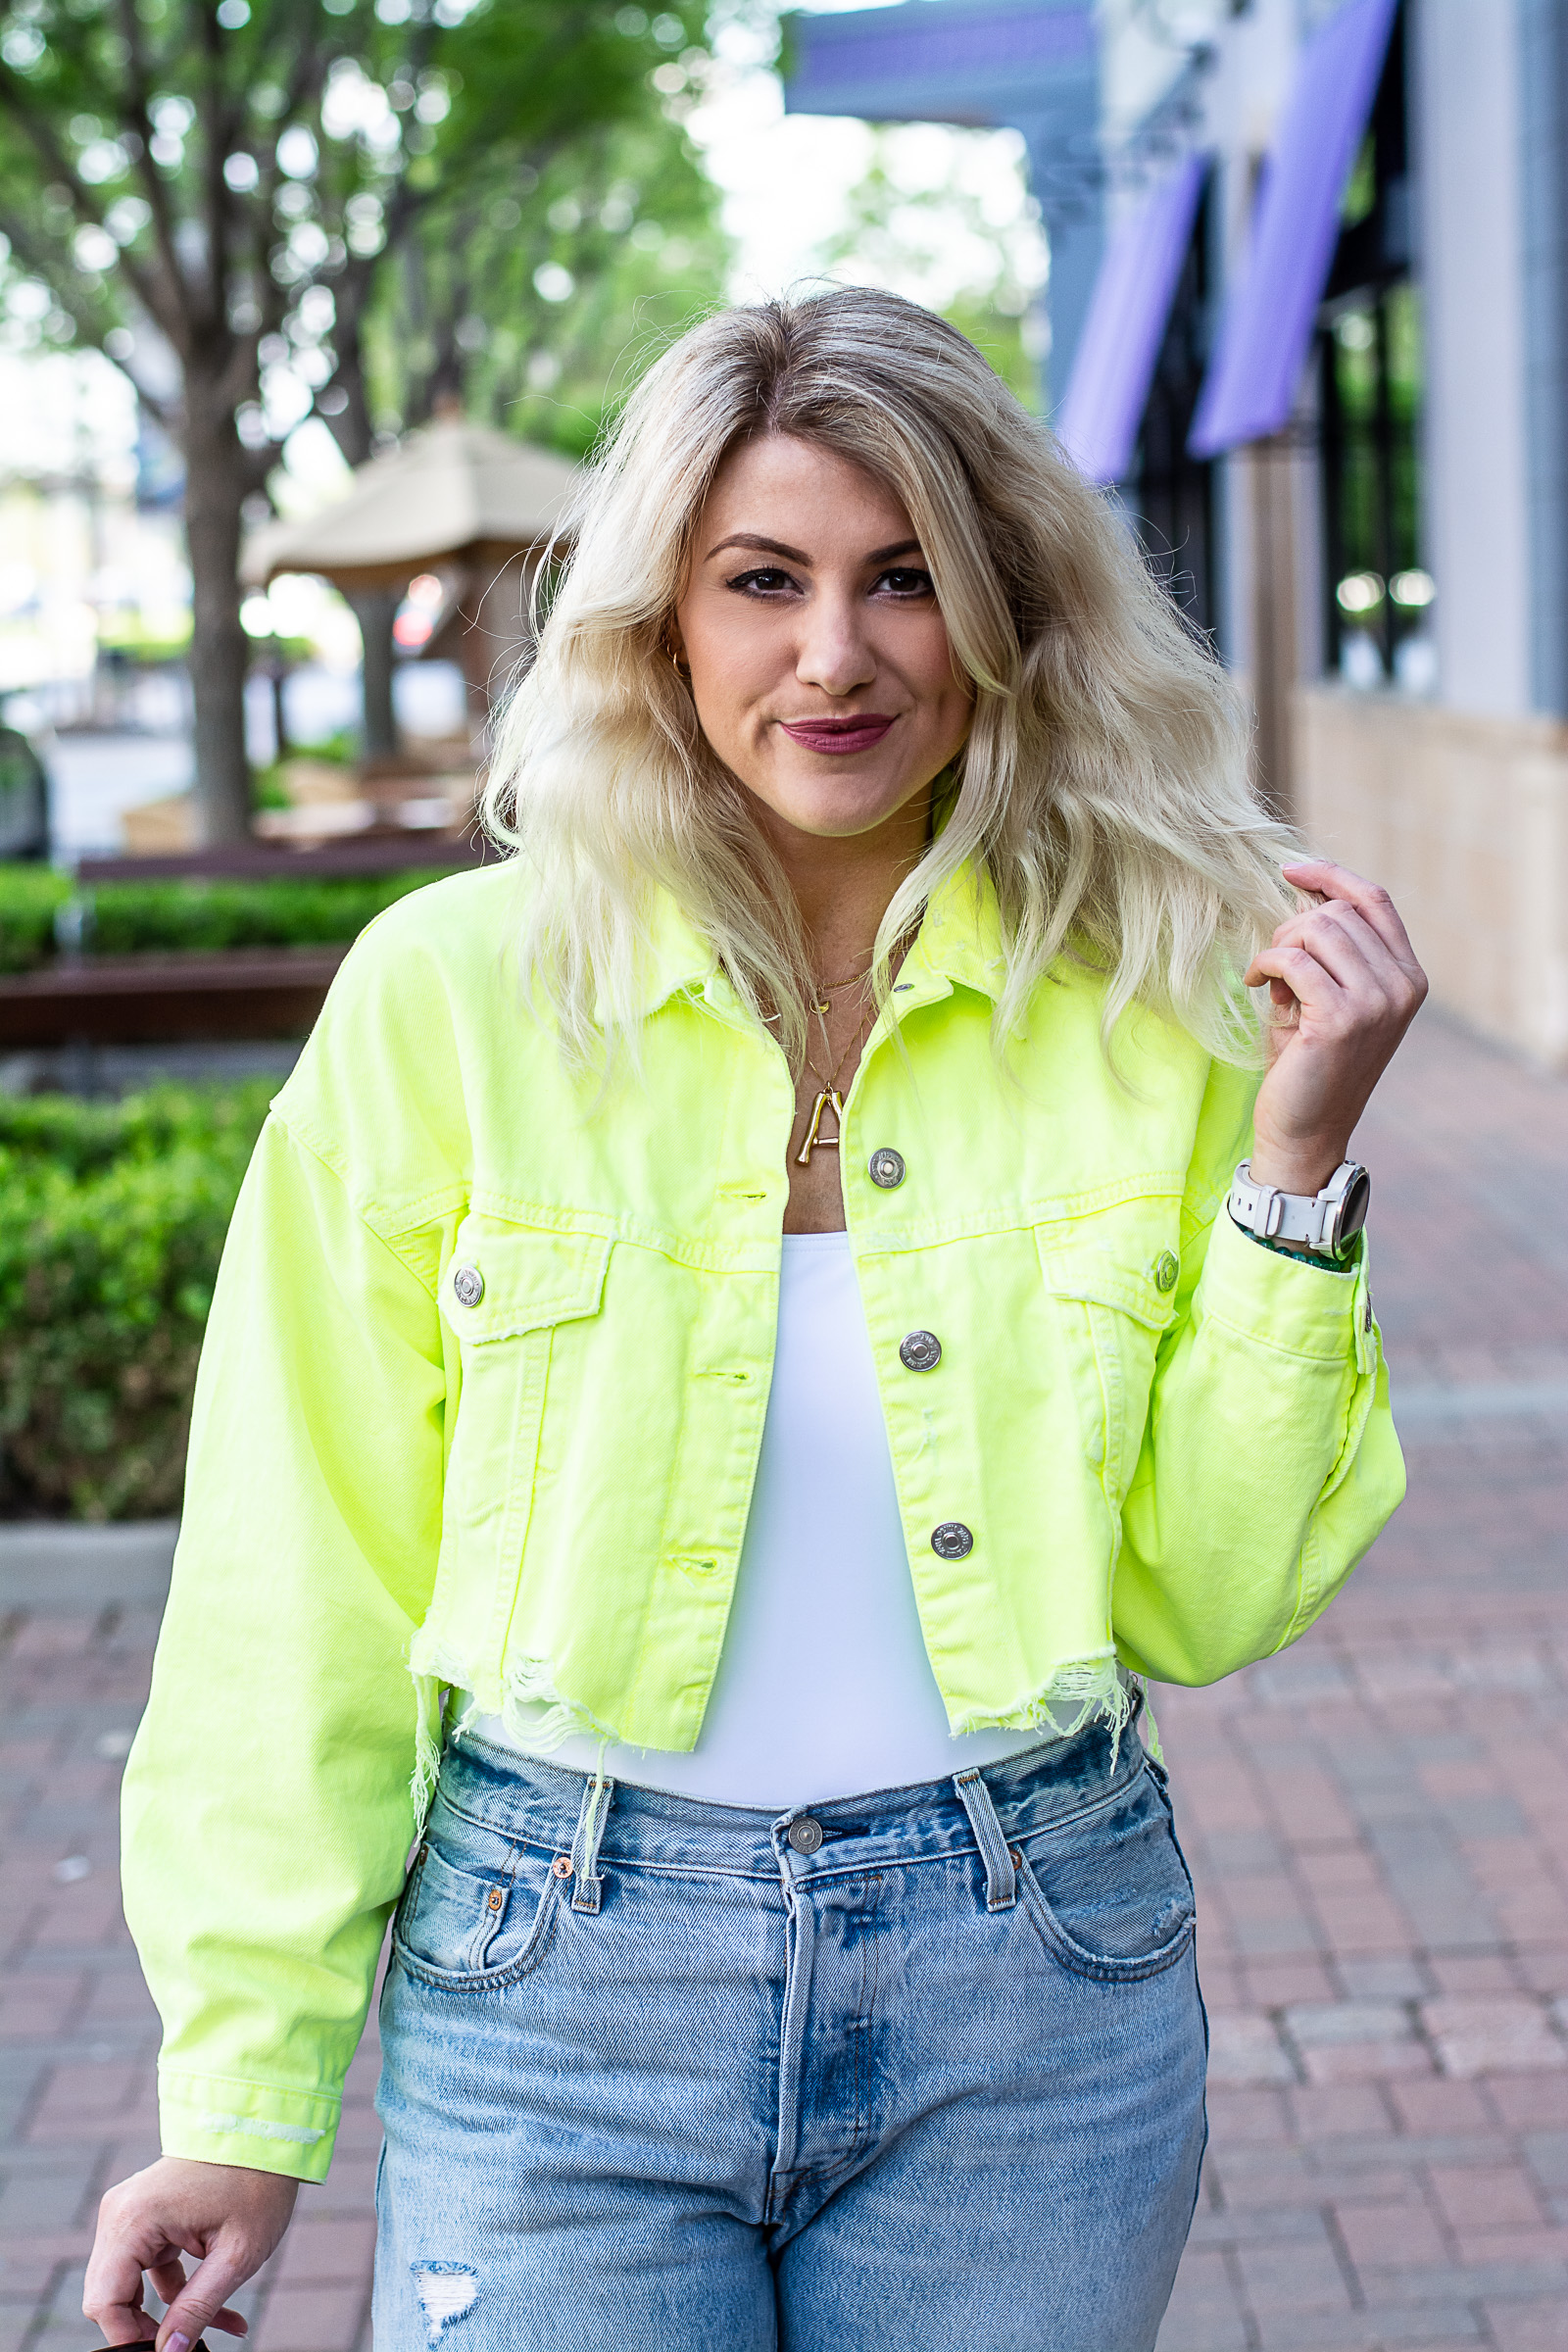  Neon Jacket for Kansas City SPACES. | Ash from LSR